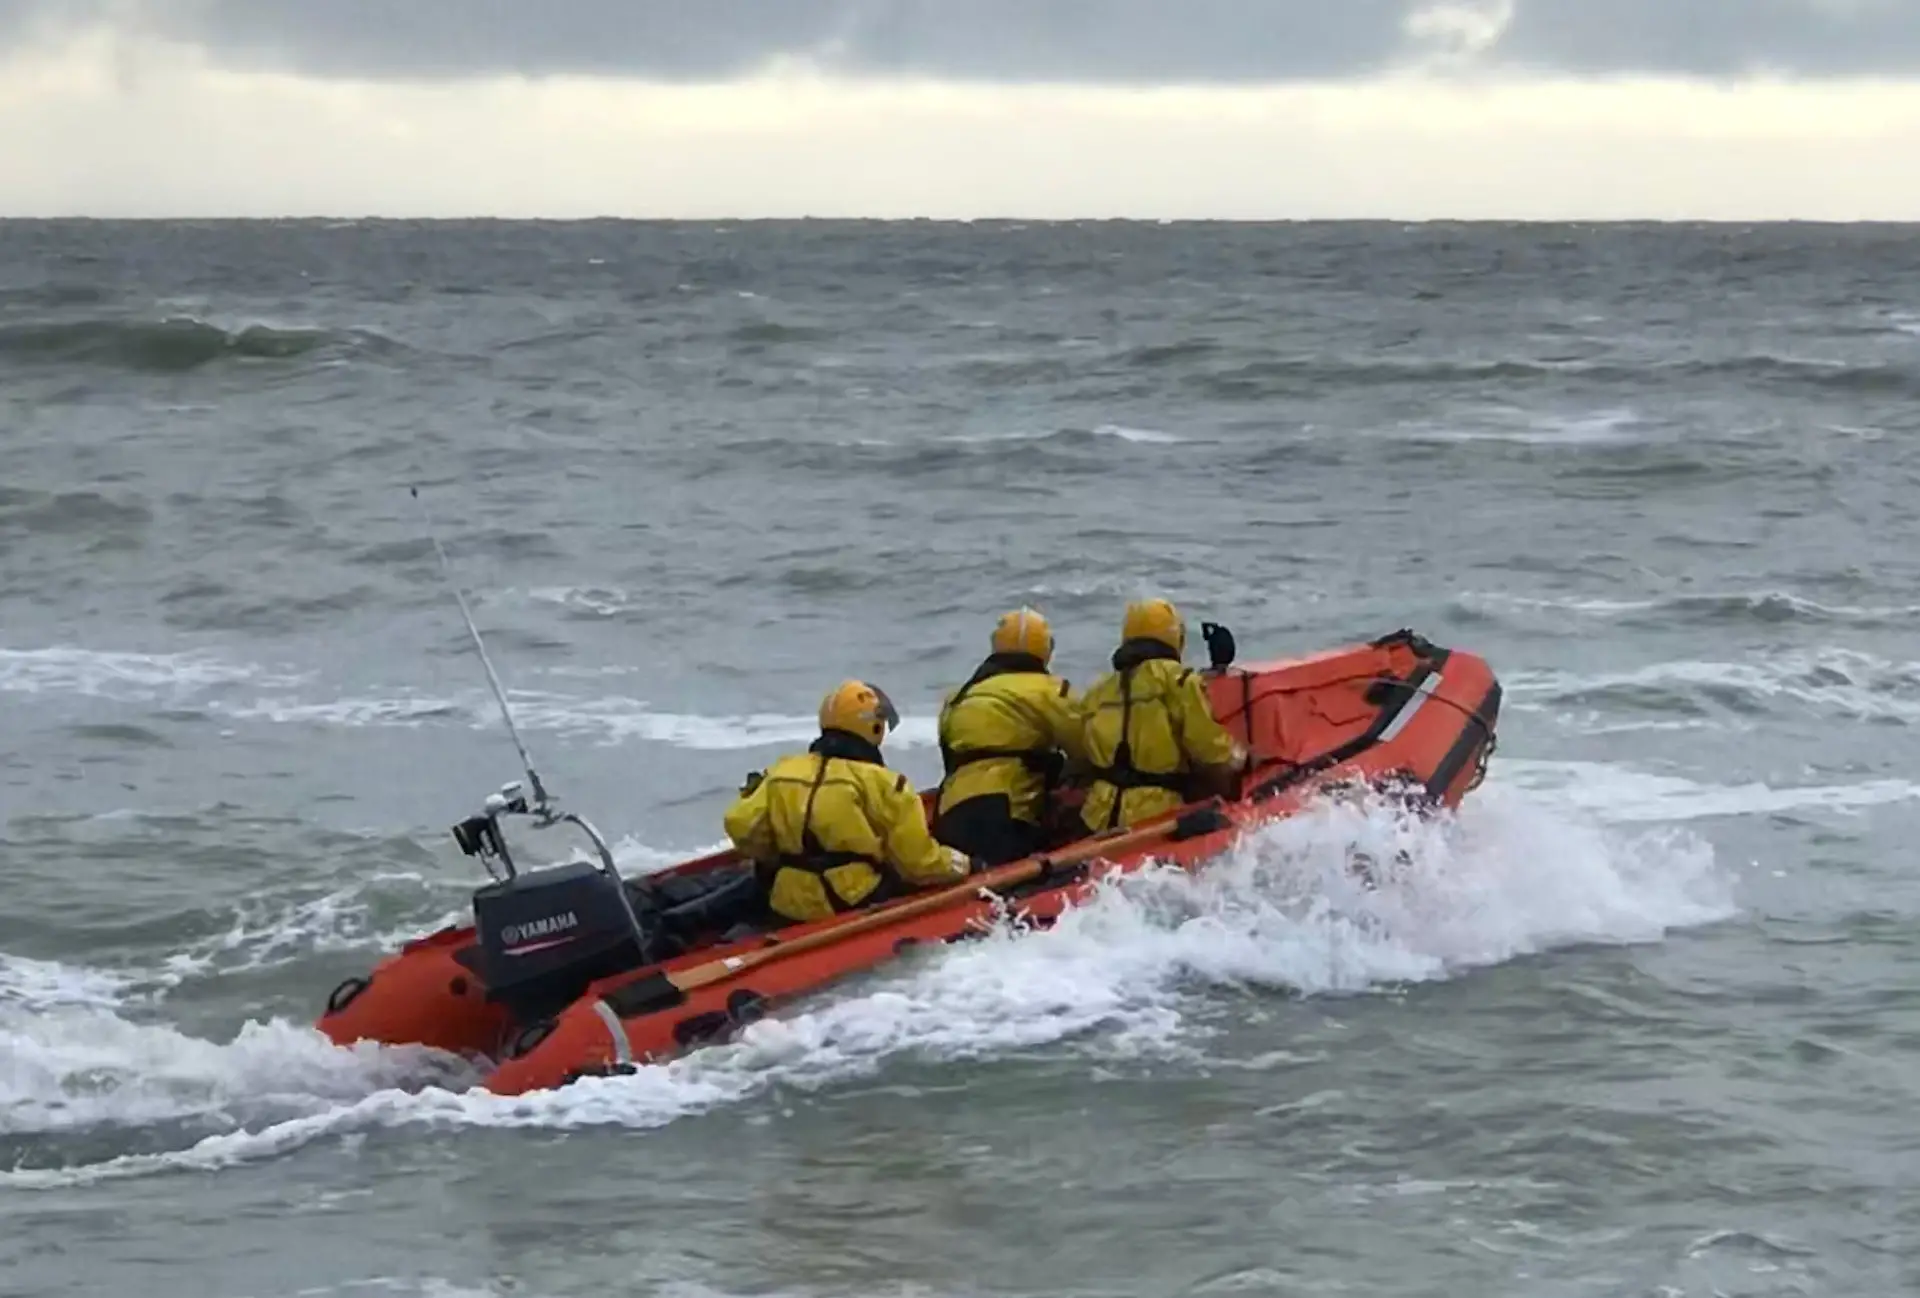 Freshwater lifeboat rescue